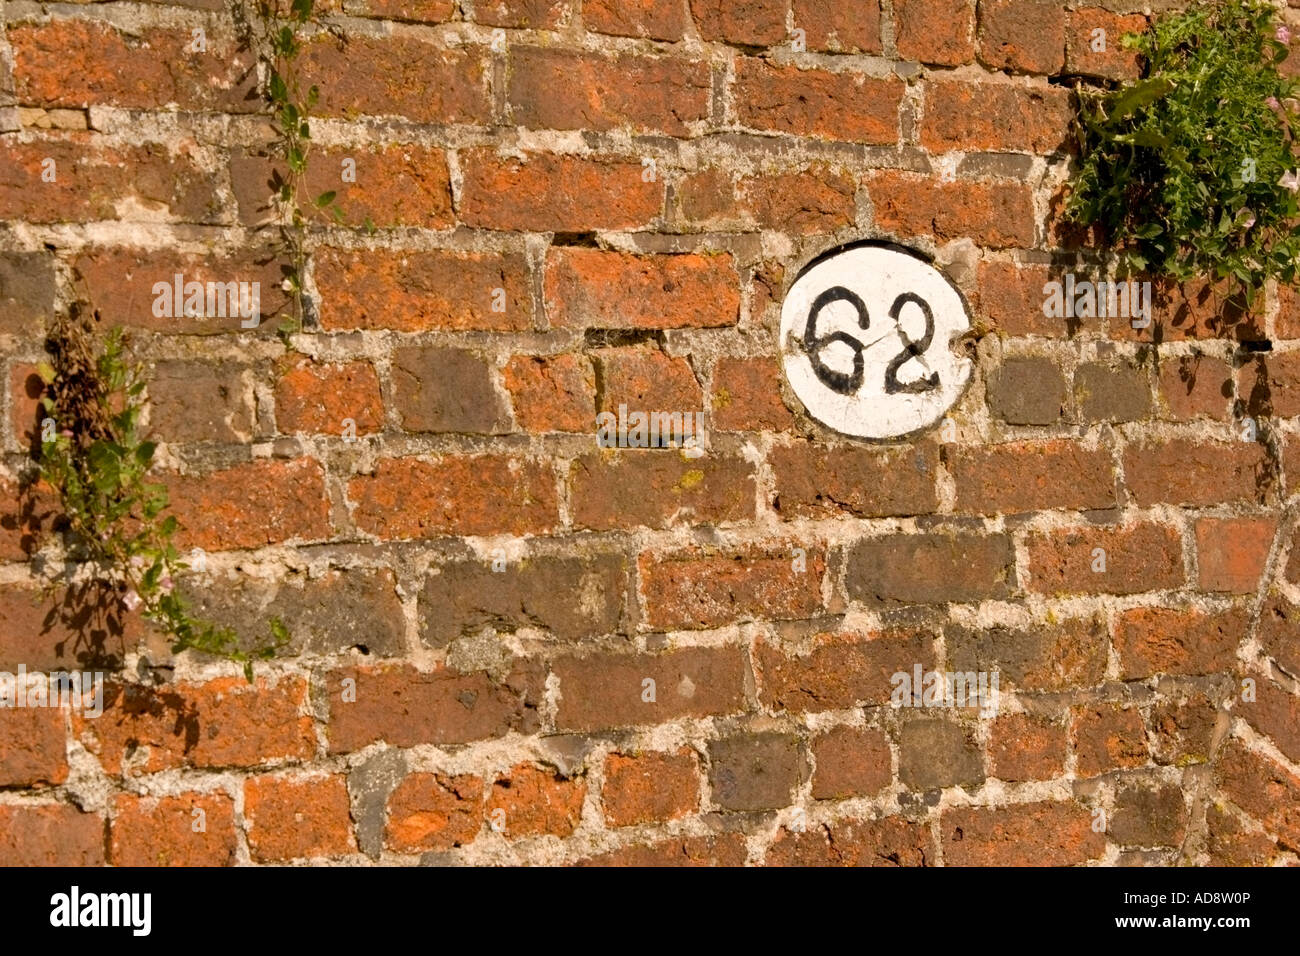 No 62 painted on an old brick wall next to a canal bridge Stock Photo